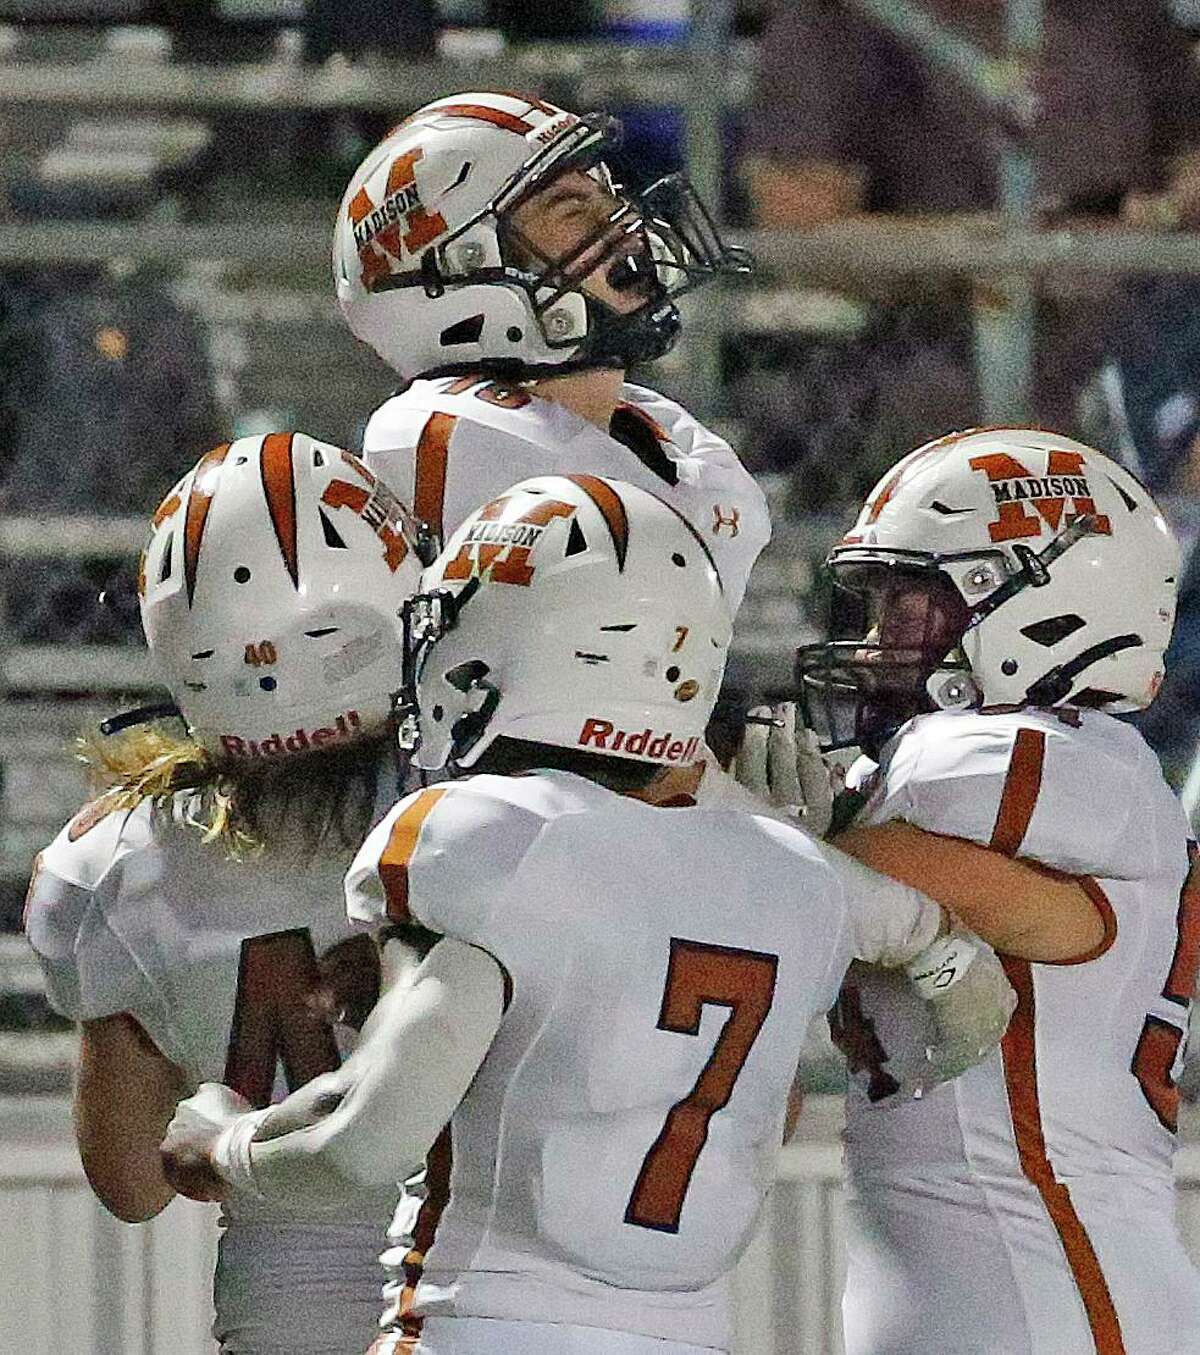 Madison Damian Mendoza(15) is lifted up by teammates after his interception stopped a Smithson Valley drive at Smithson Valley HS on Friday, Sept. 3. 2021.